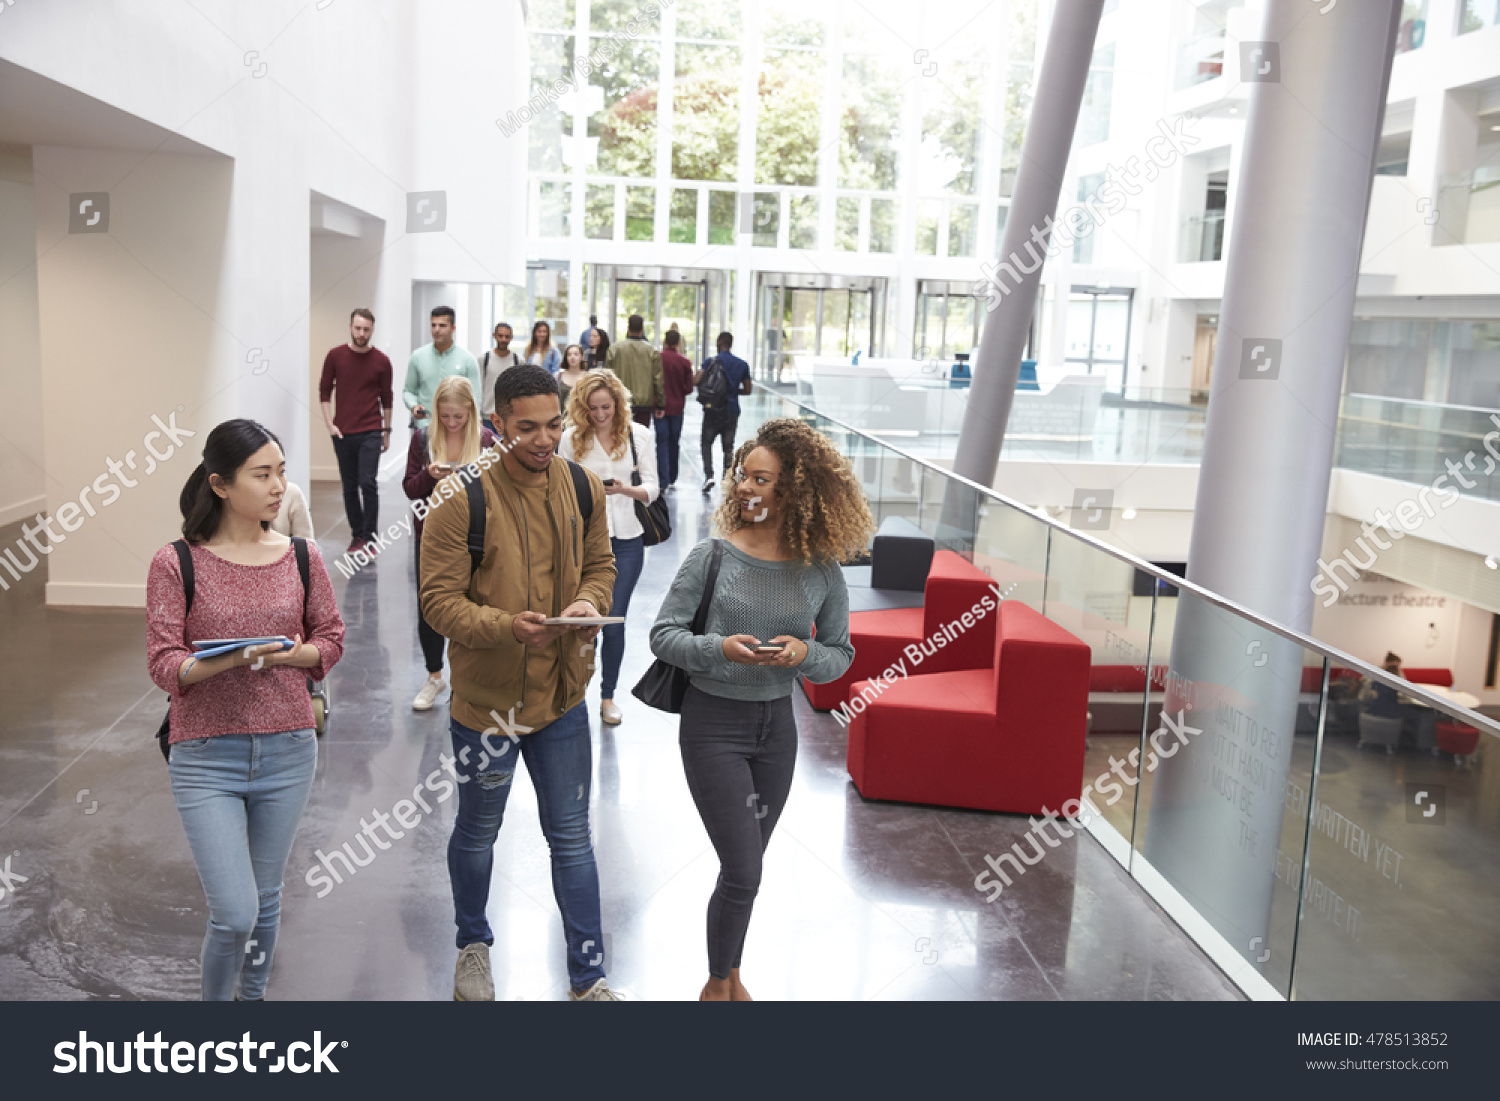 Students walk and talk using mobile devices in university #478513852